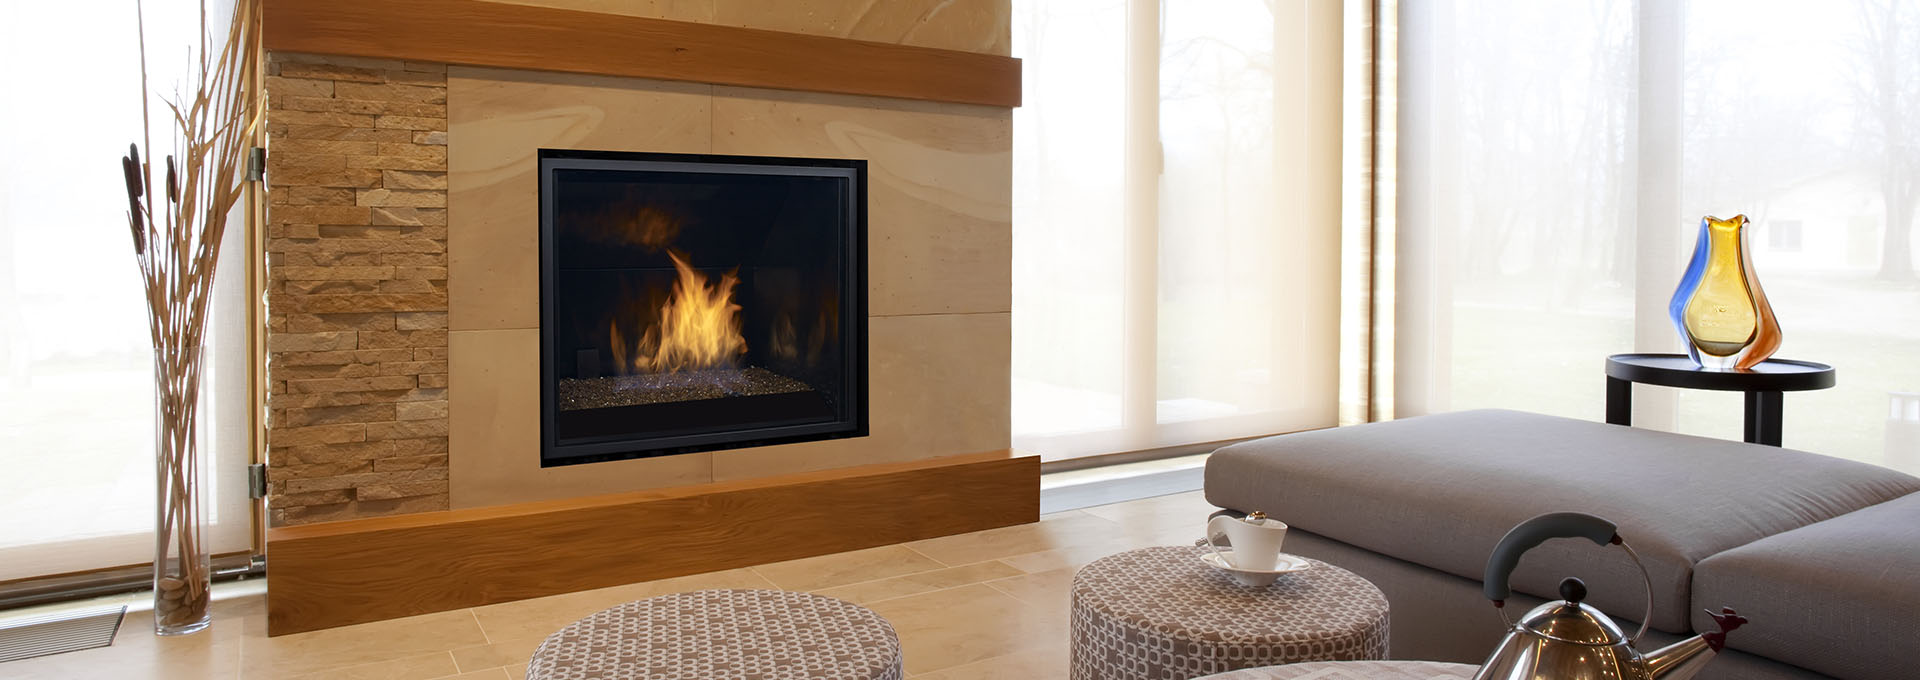 Want to enjoy the warmth and beauty of a fireplace